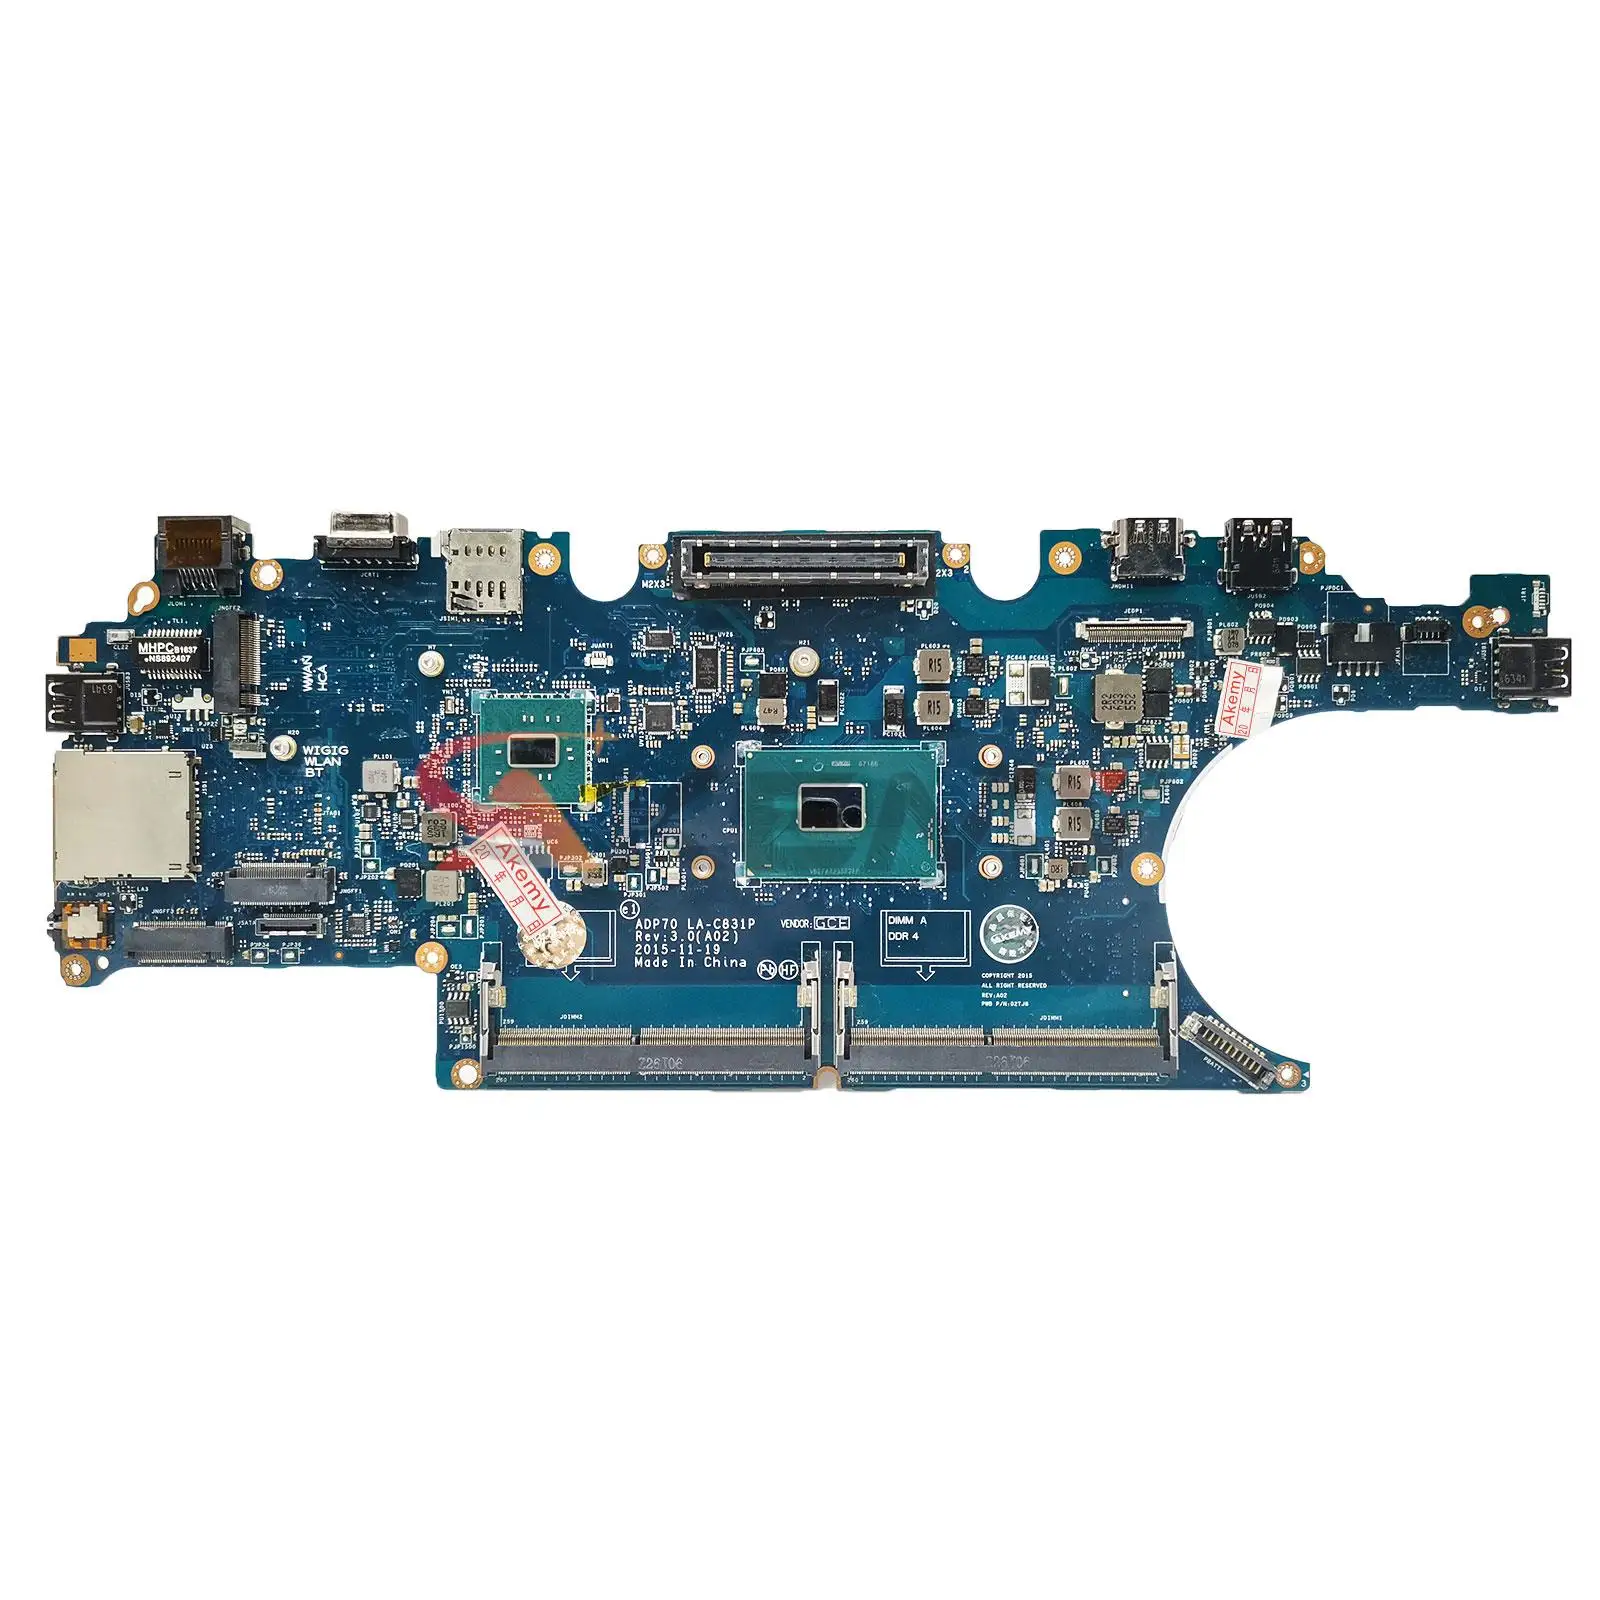 

CN-0476JC 02MMKC 0792TG Mainboard For Dell Latitude E5470 LA-C831P Laptop Motherboard DDR4L With I5 I7 CPU 100% Fully Tested